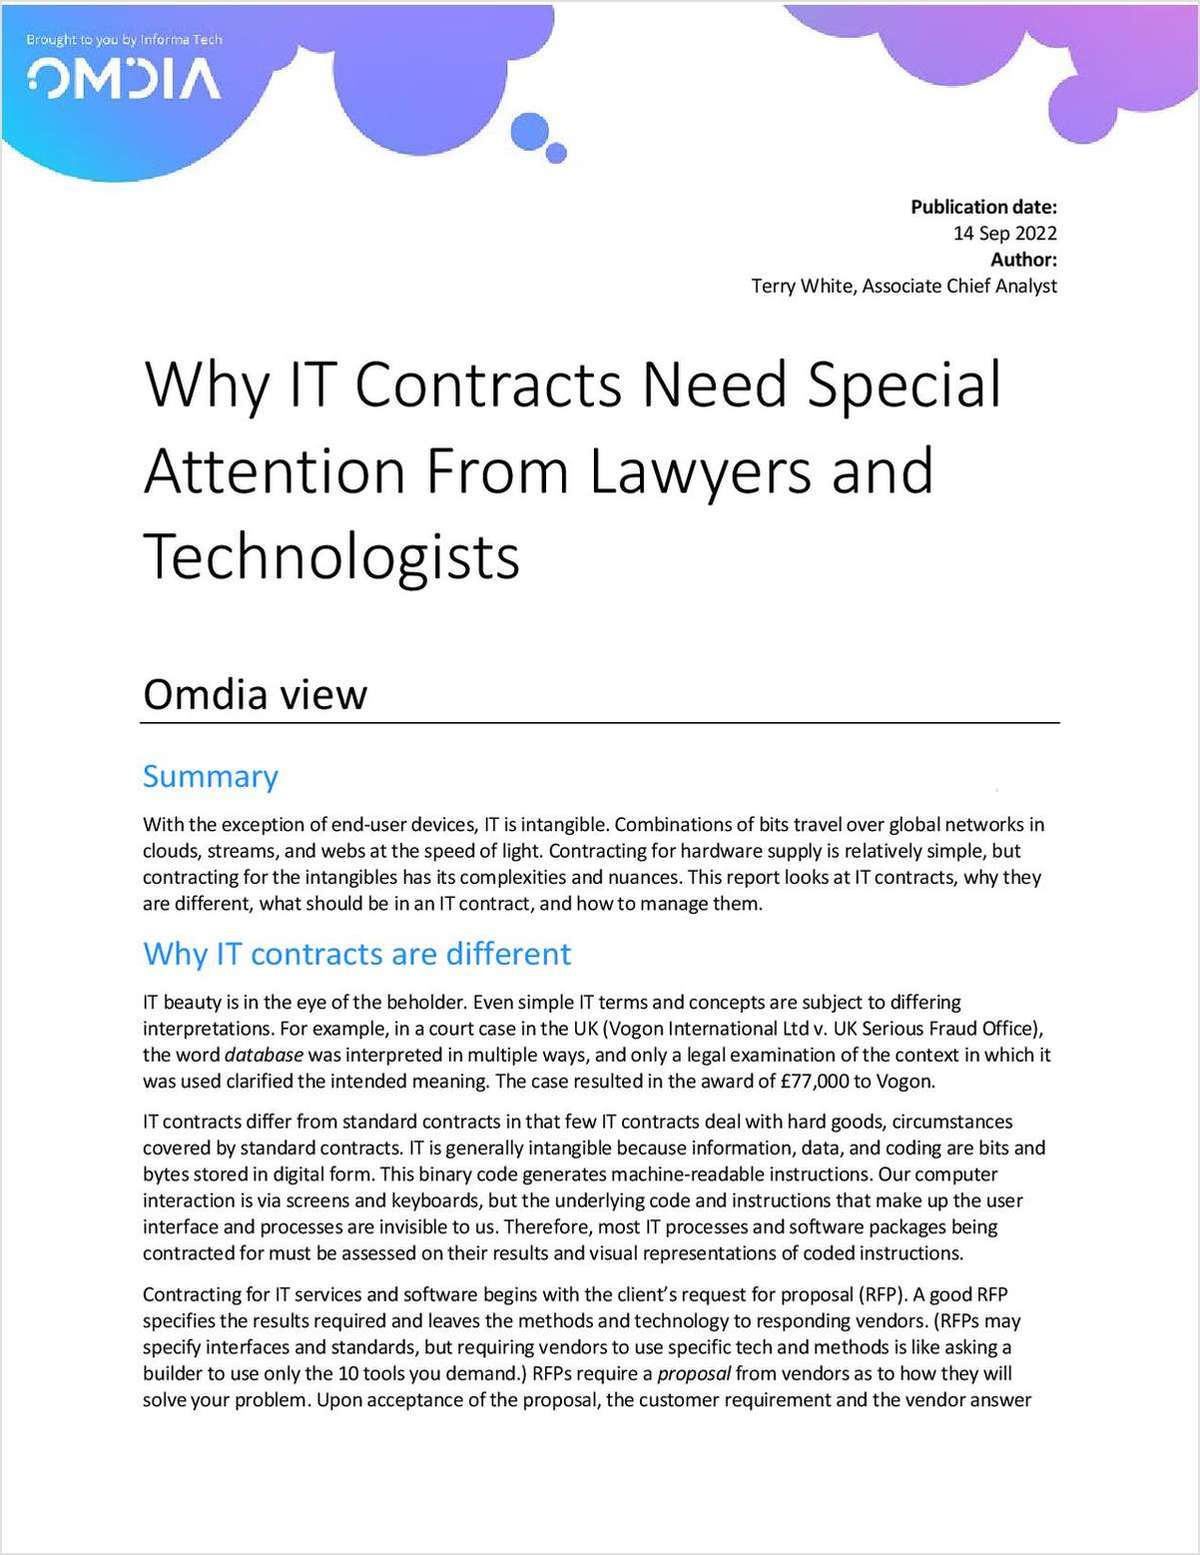 Why IT Contracts Need Special Attention From Lawyers and Technologists